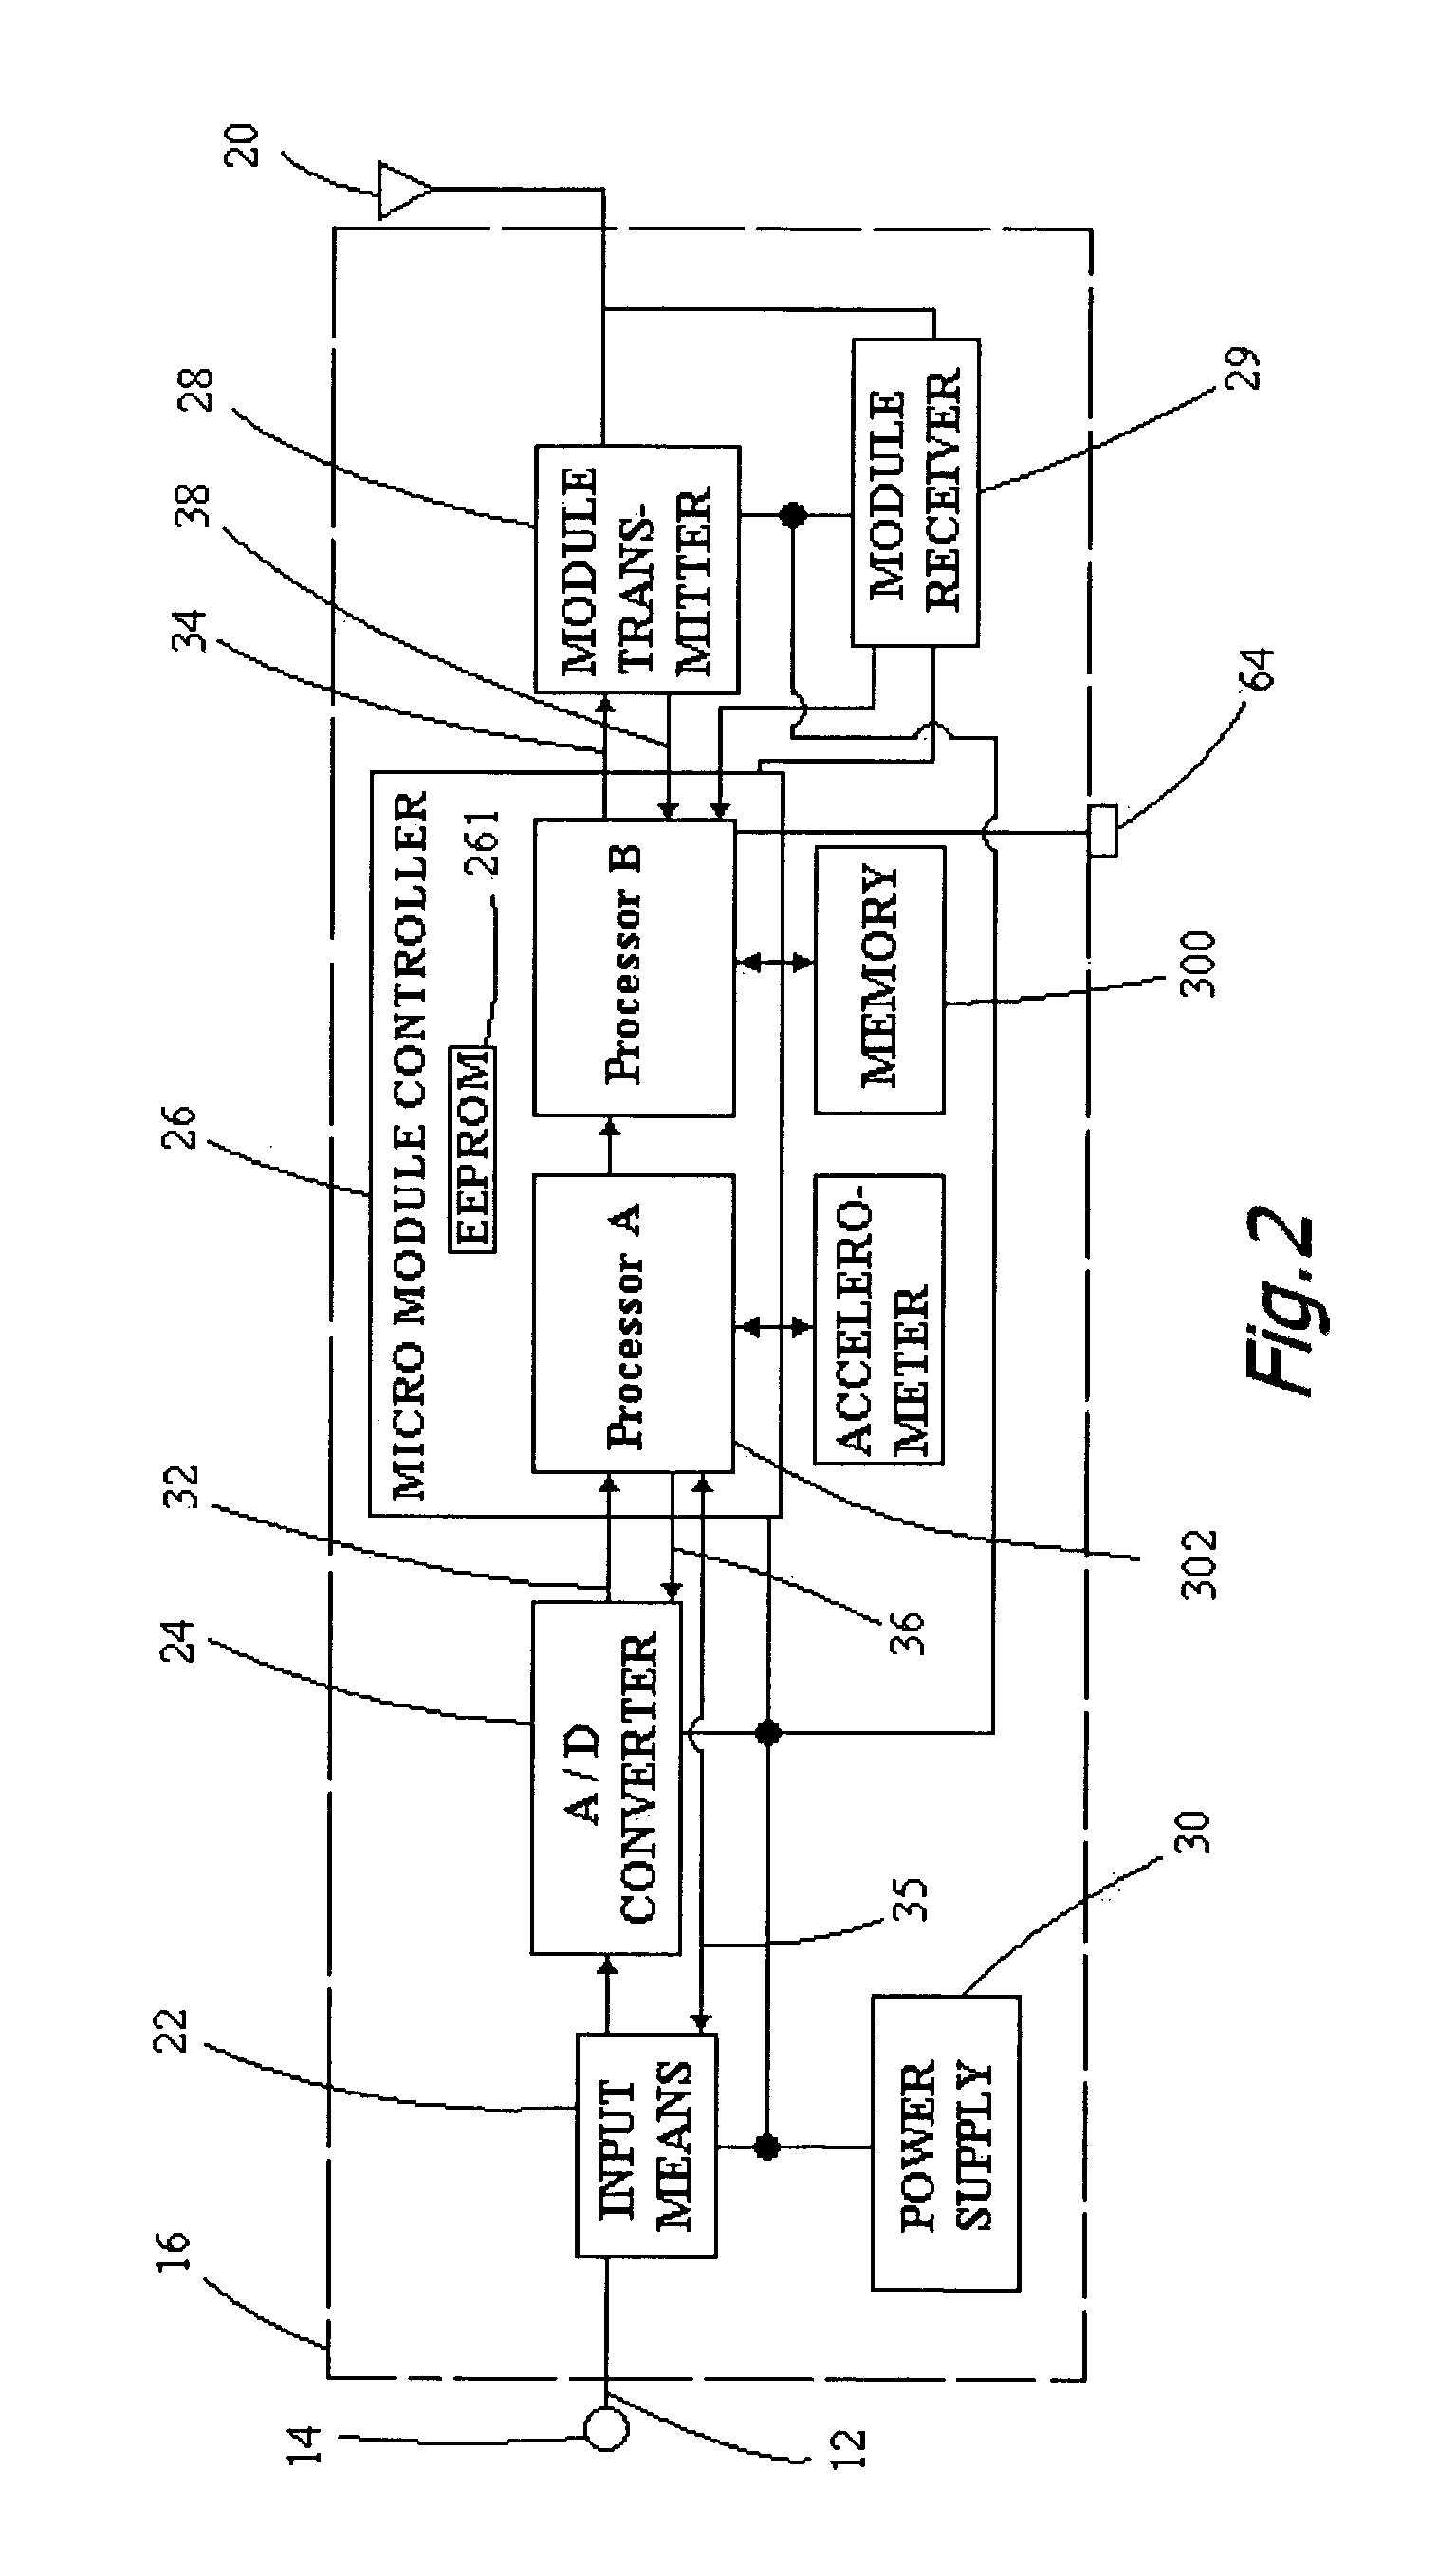 EEG data acquisition system with novel features